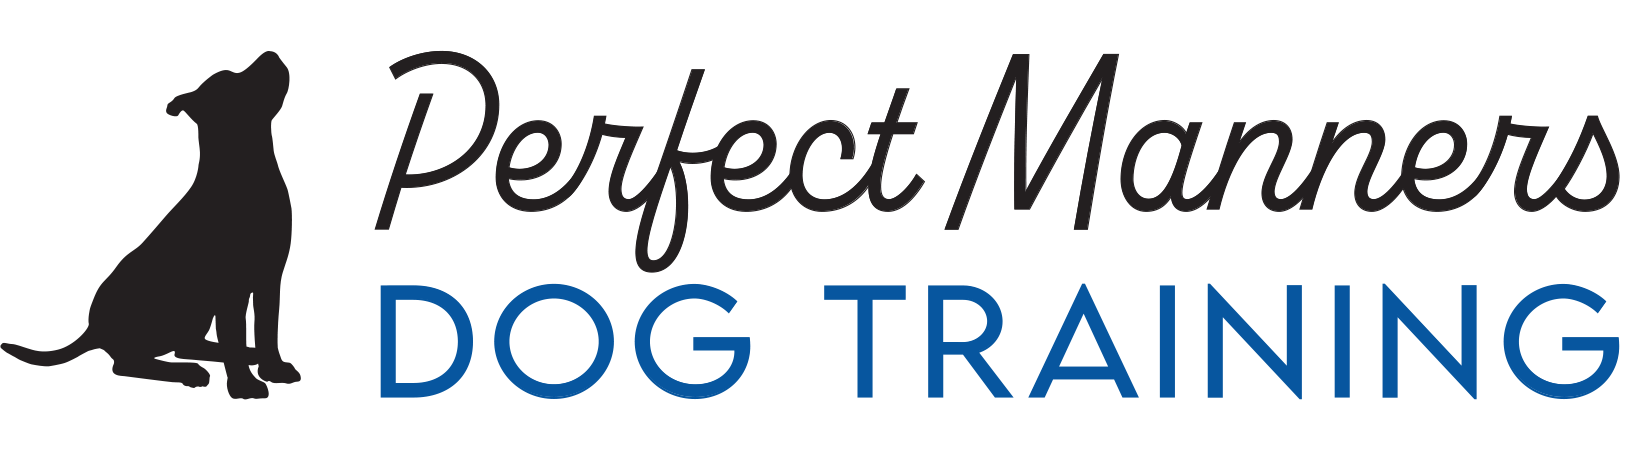 Perfect Manners Dog Training & A Naperville, IL Dog Trainer and Obedience Behaviorist